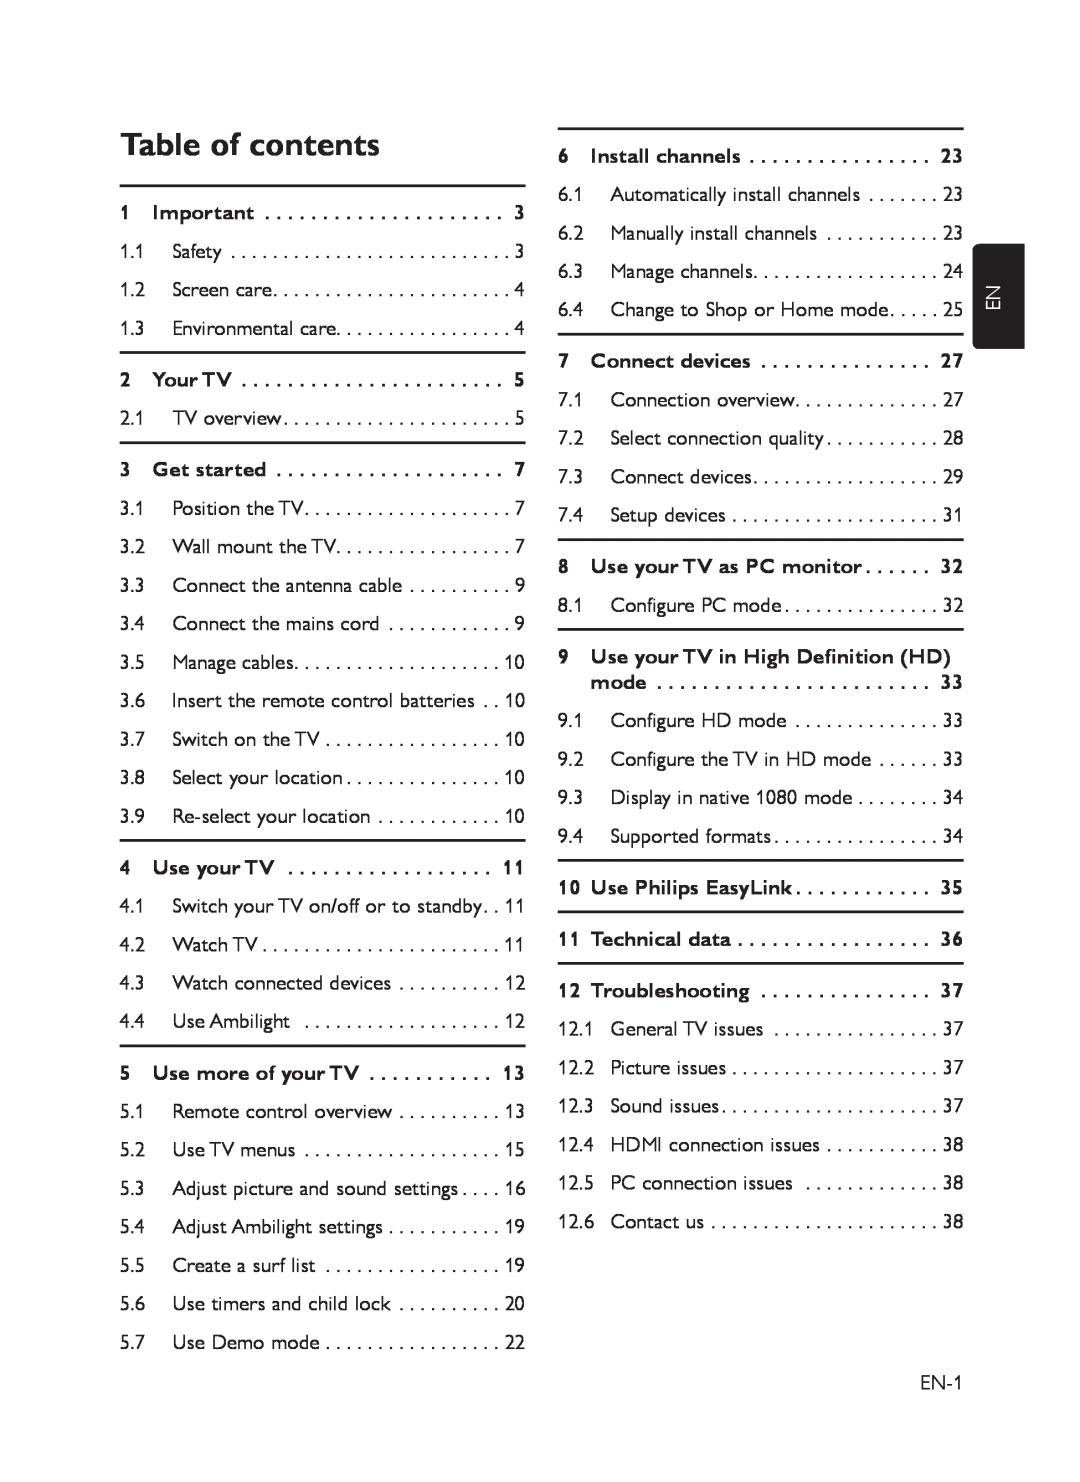 Philips 52PFL5403 Table of contents, Use more of your TV, Connect devices, Use your TV as PC monitor, Technical data 